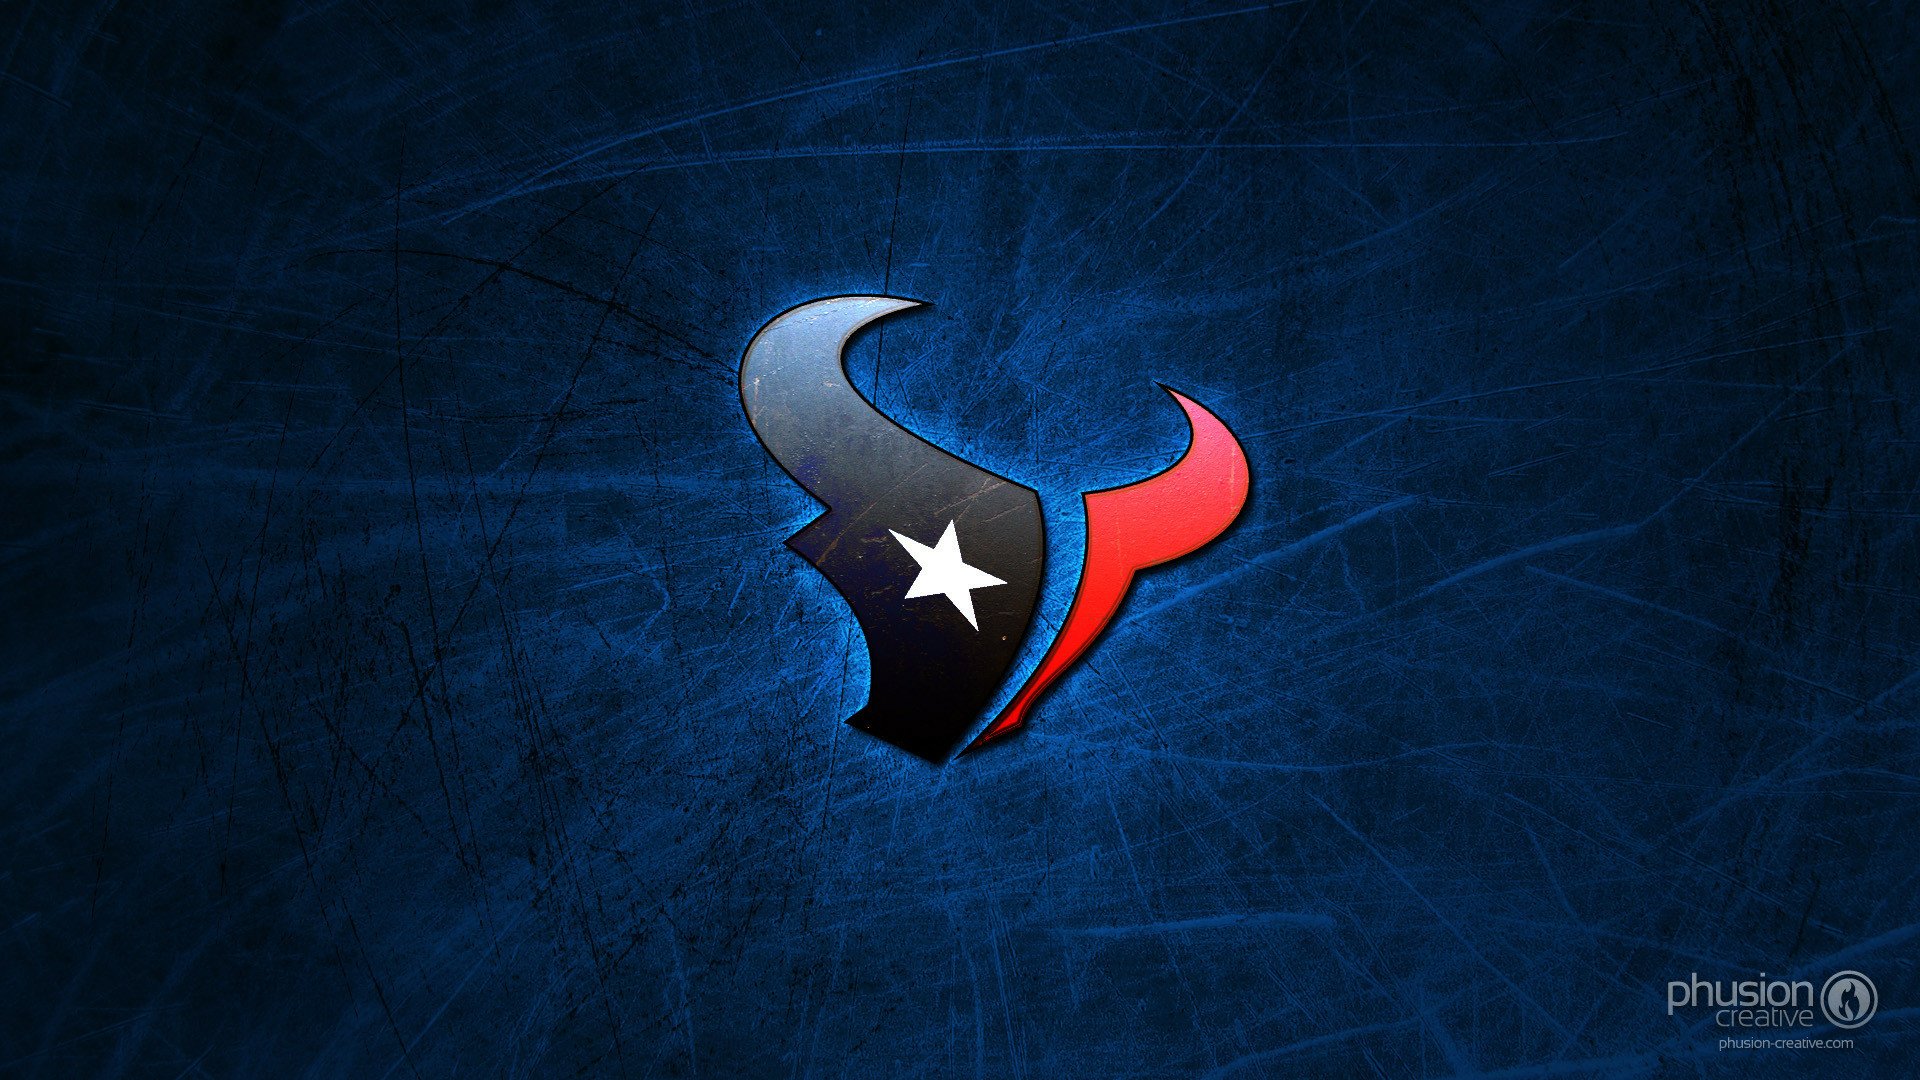 Houston Texans HD Wallpapers and